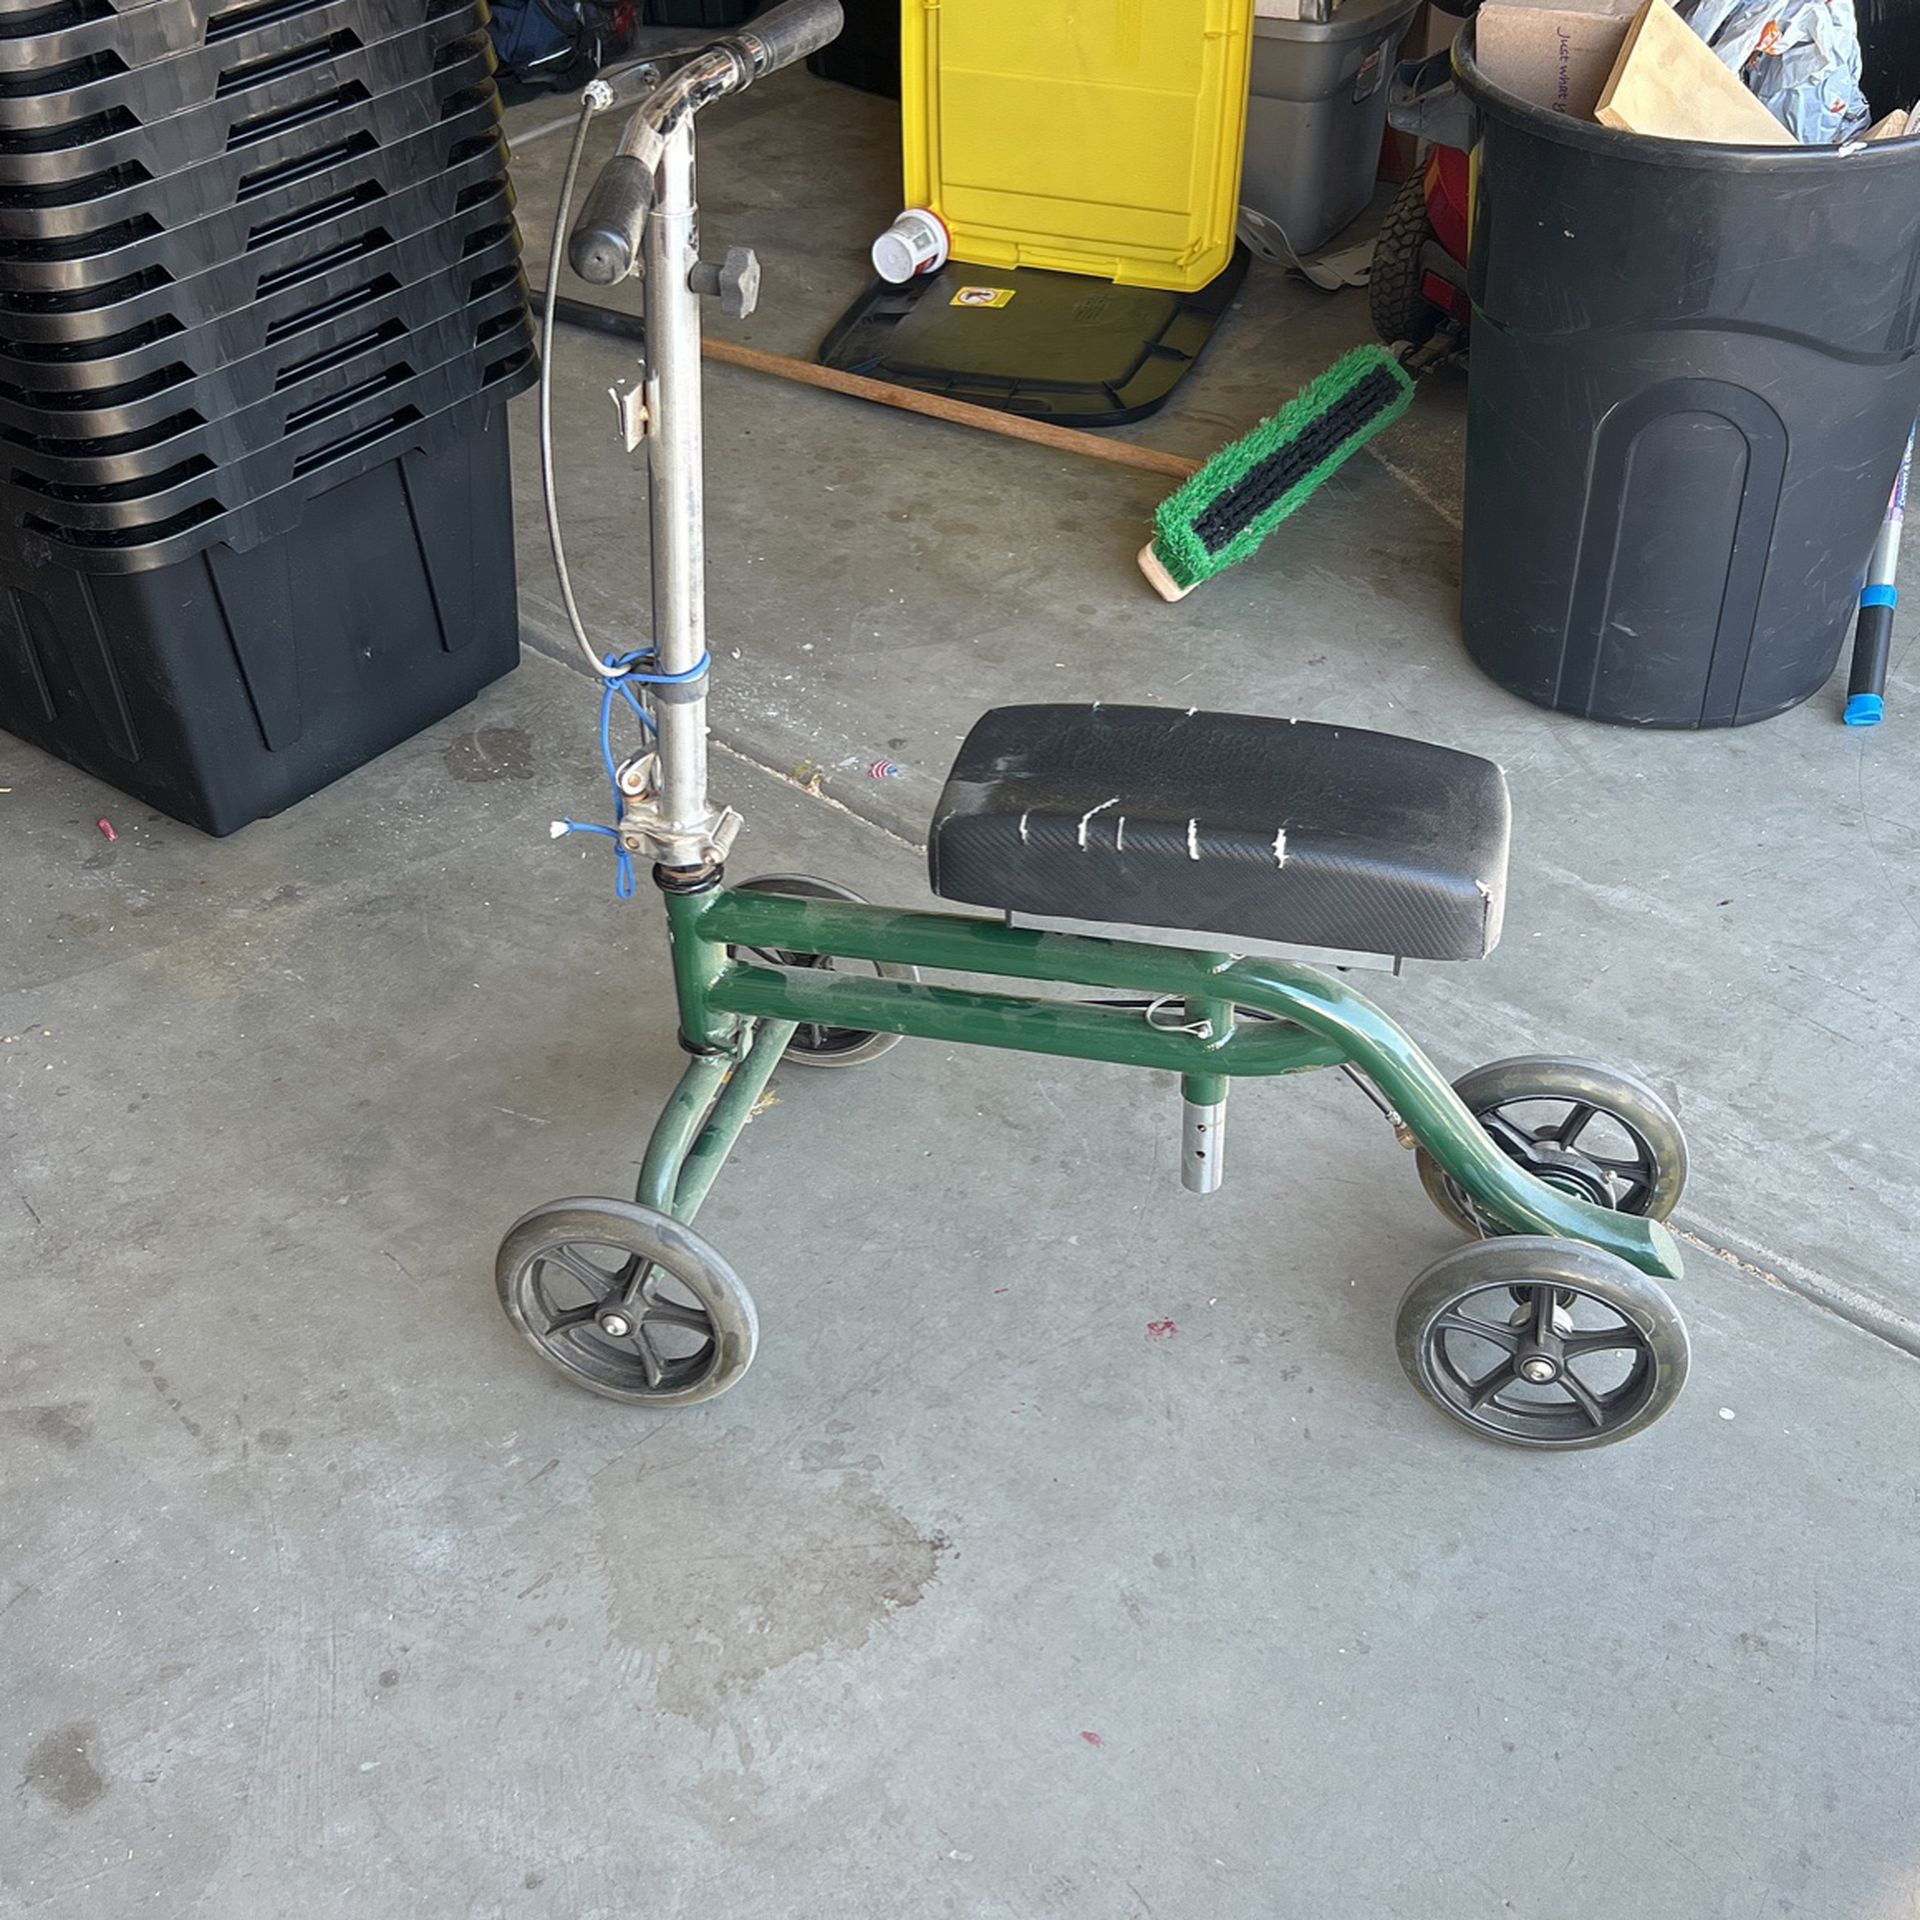 Knee Scooter. In Good Condition. $20 Gets It.